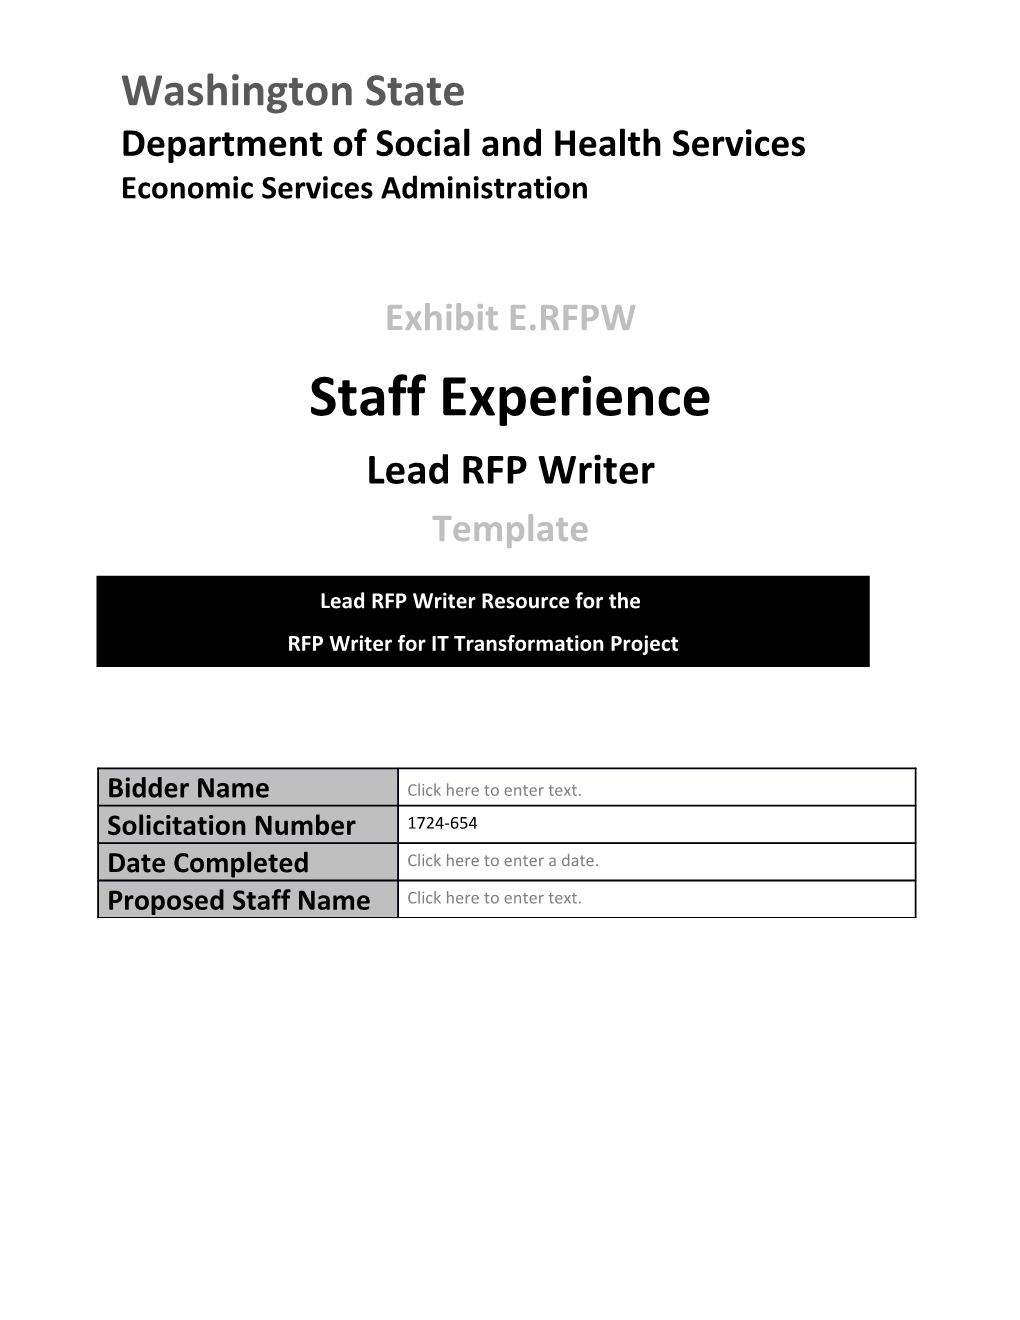 Exhibit E.RFPW: - Lead RFP Writer: Staff Experience, Qualifications and References